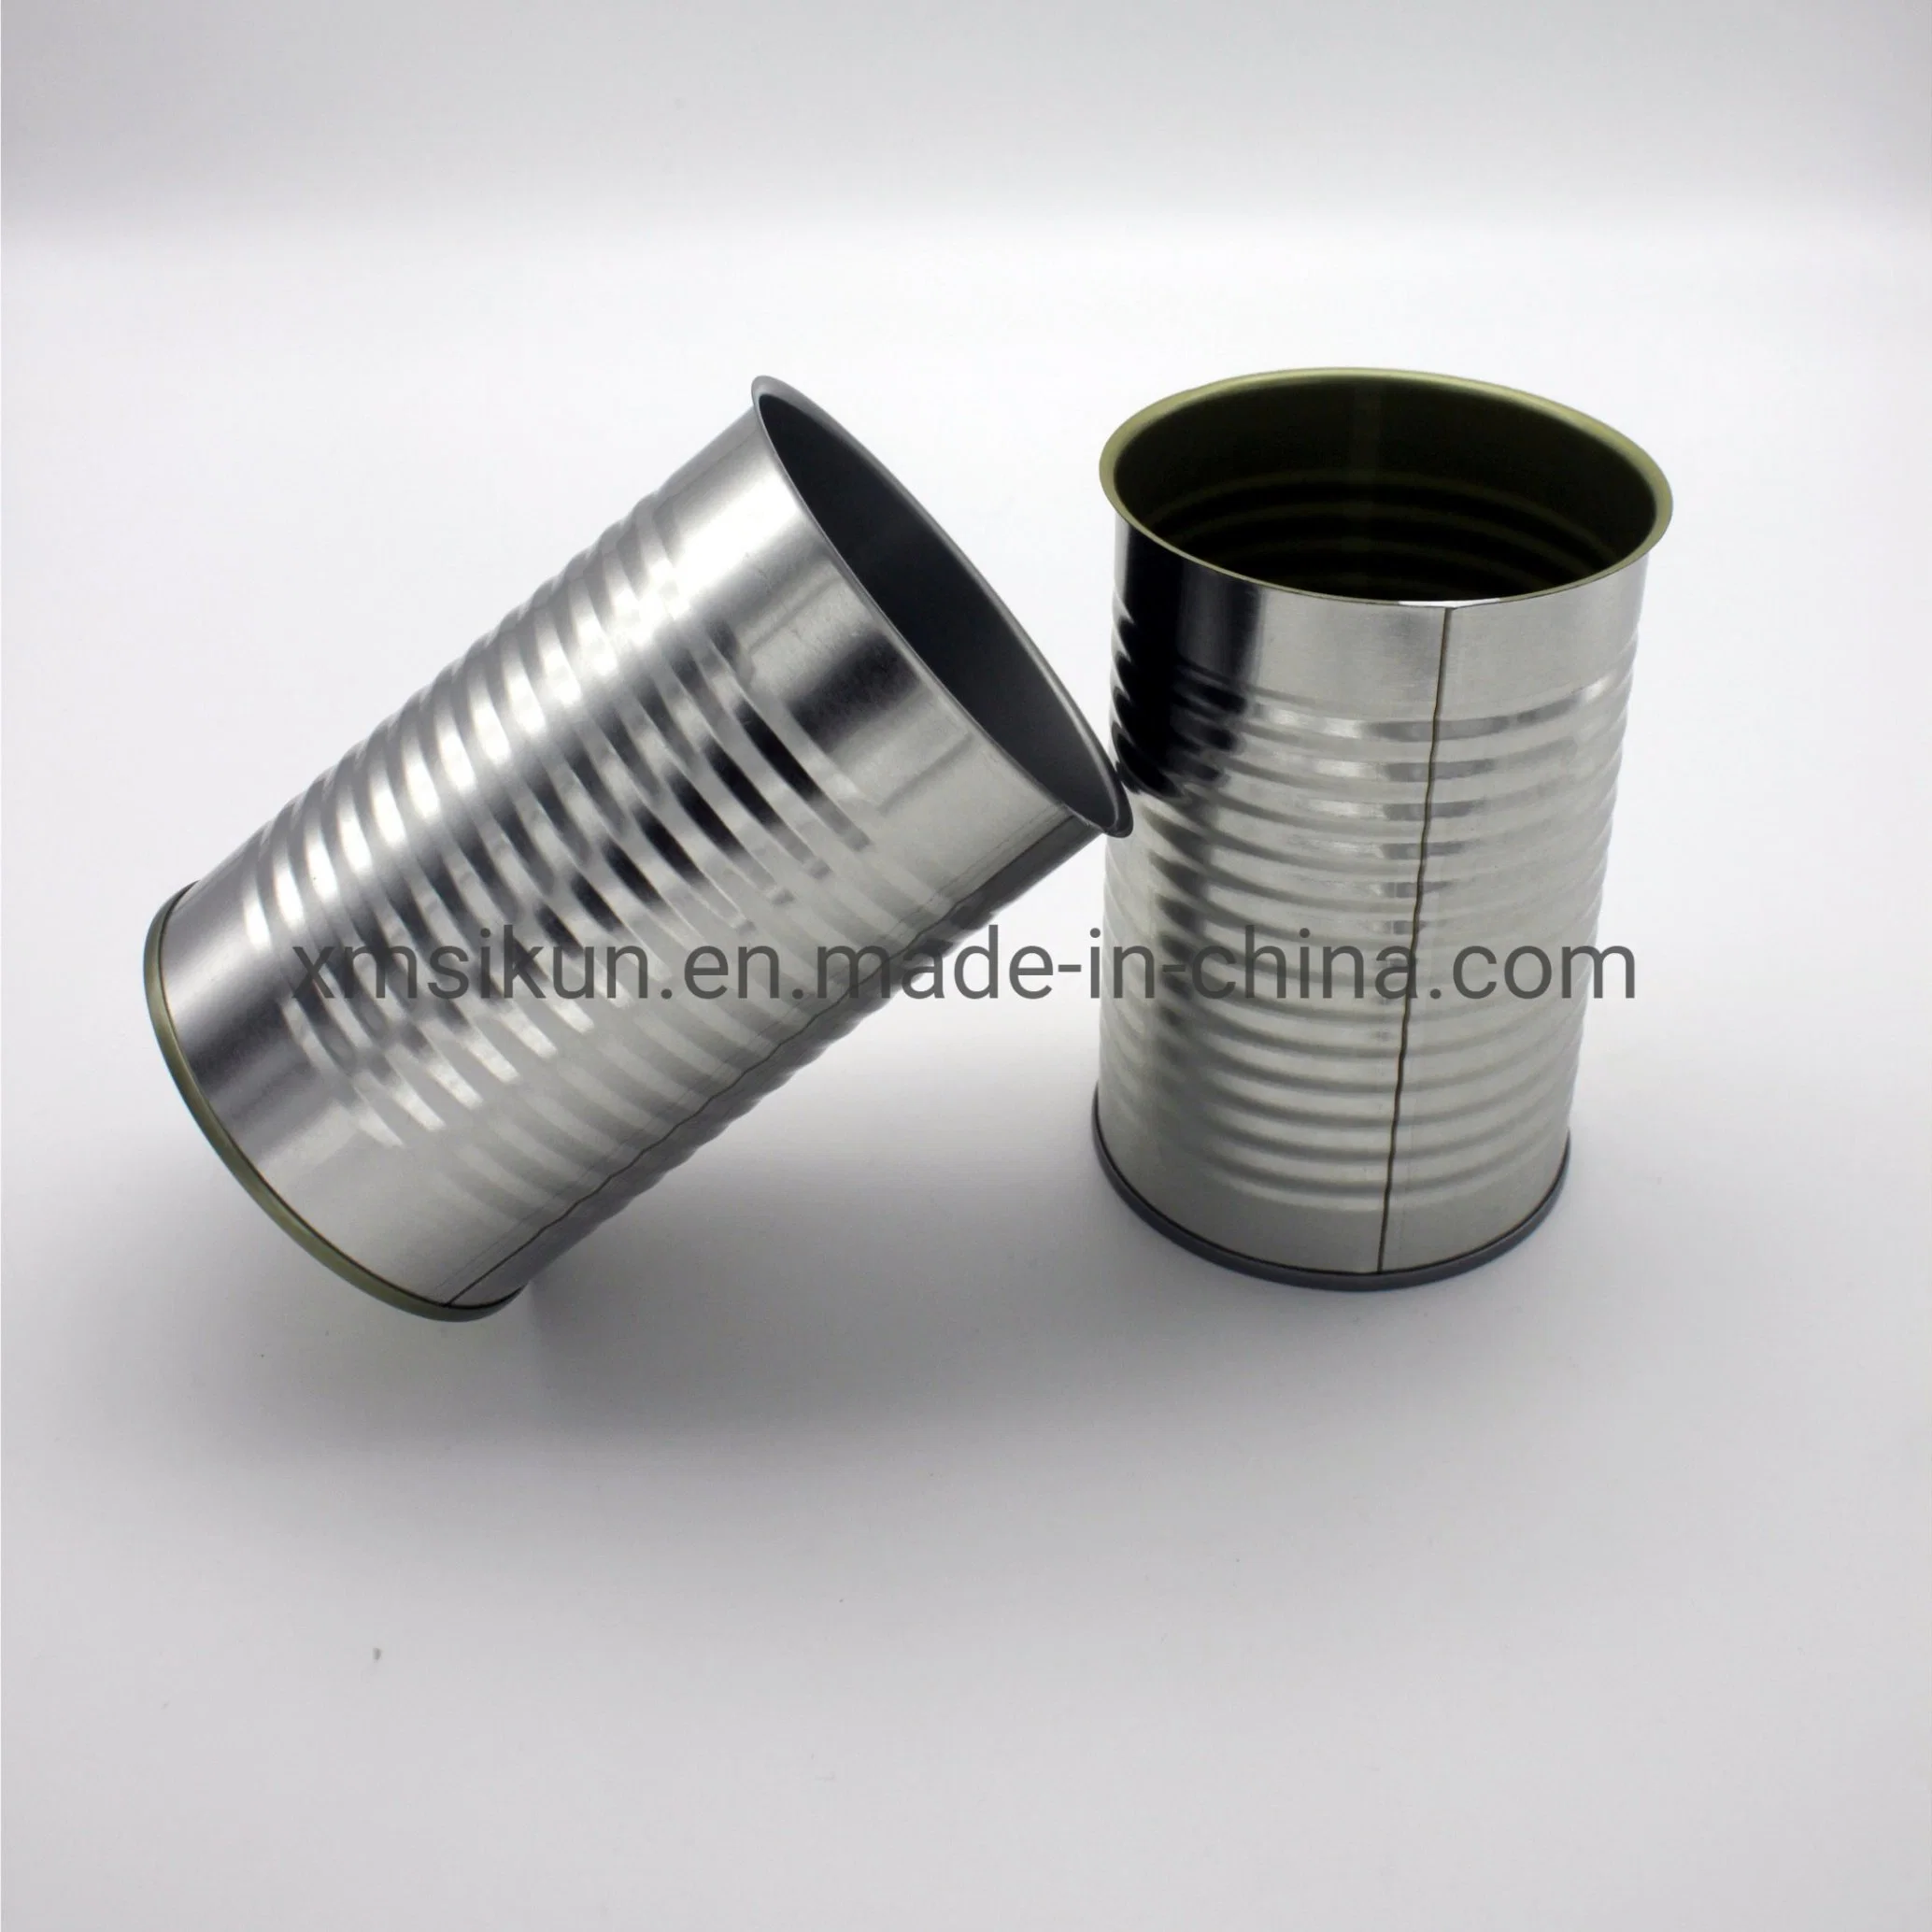 Wholesale/Supplier Hot Selling Easy Open Lid Round Tin Can 7113# for Food Grade Packing